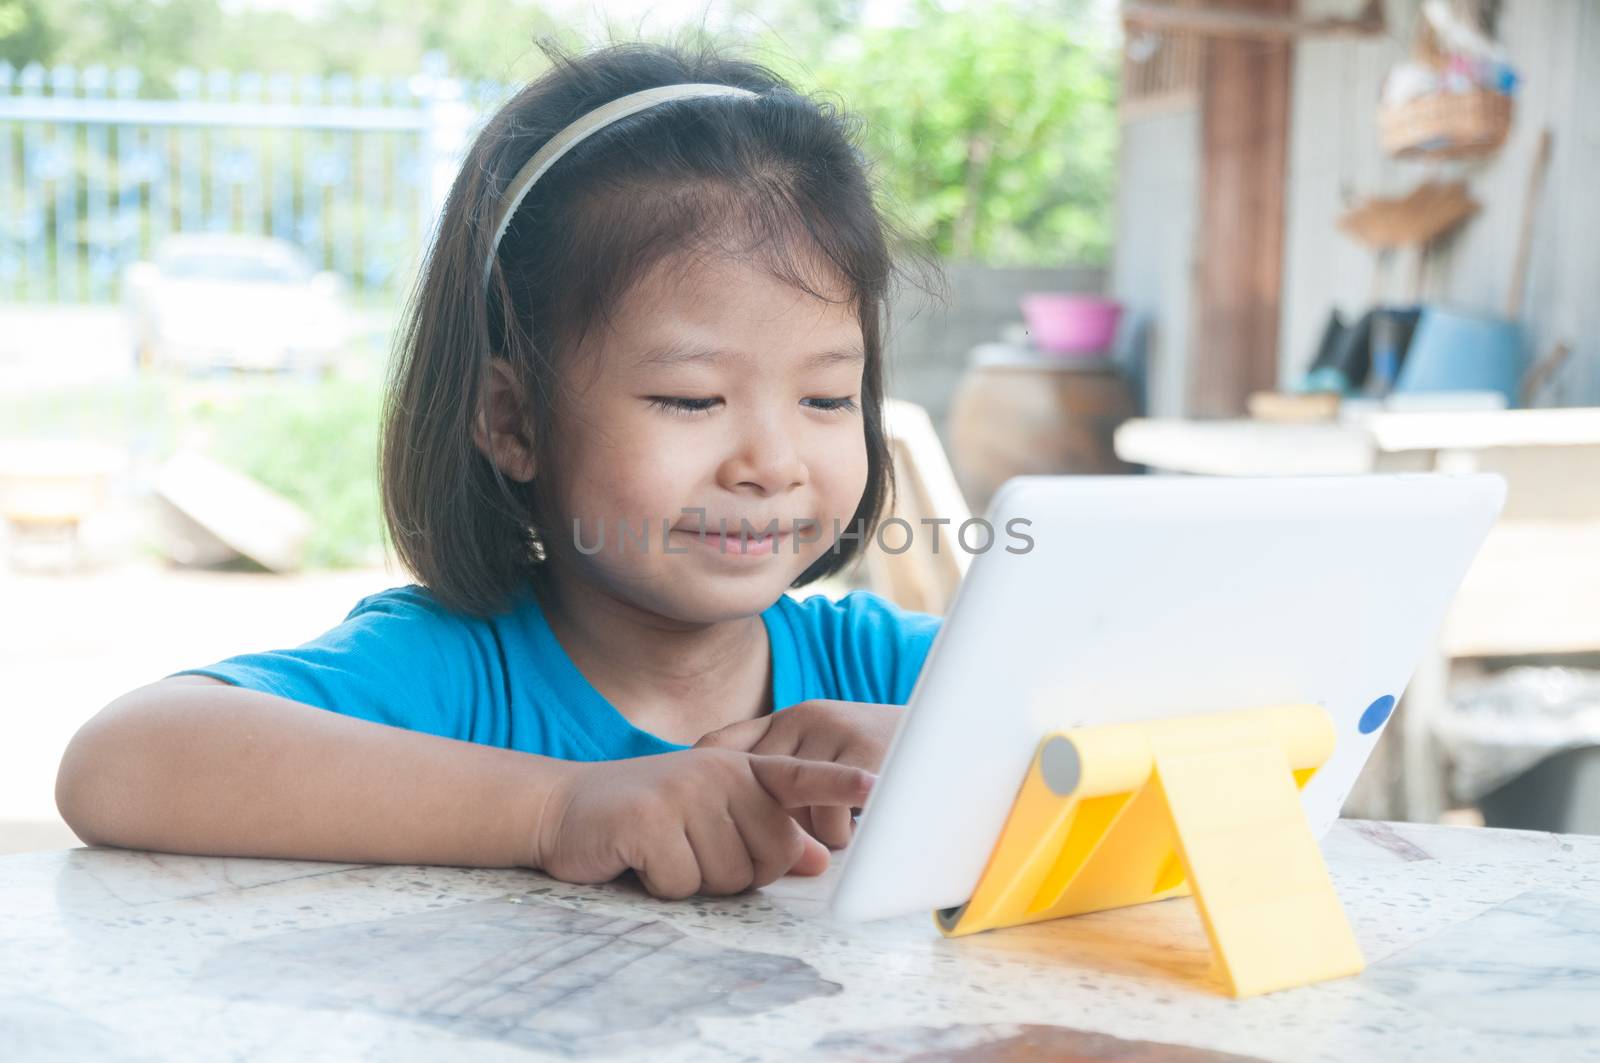 Asian Girl learning online course or playing game online at home by thampapon